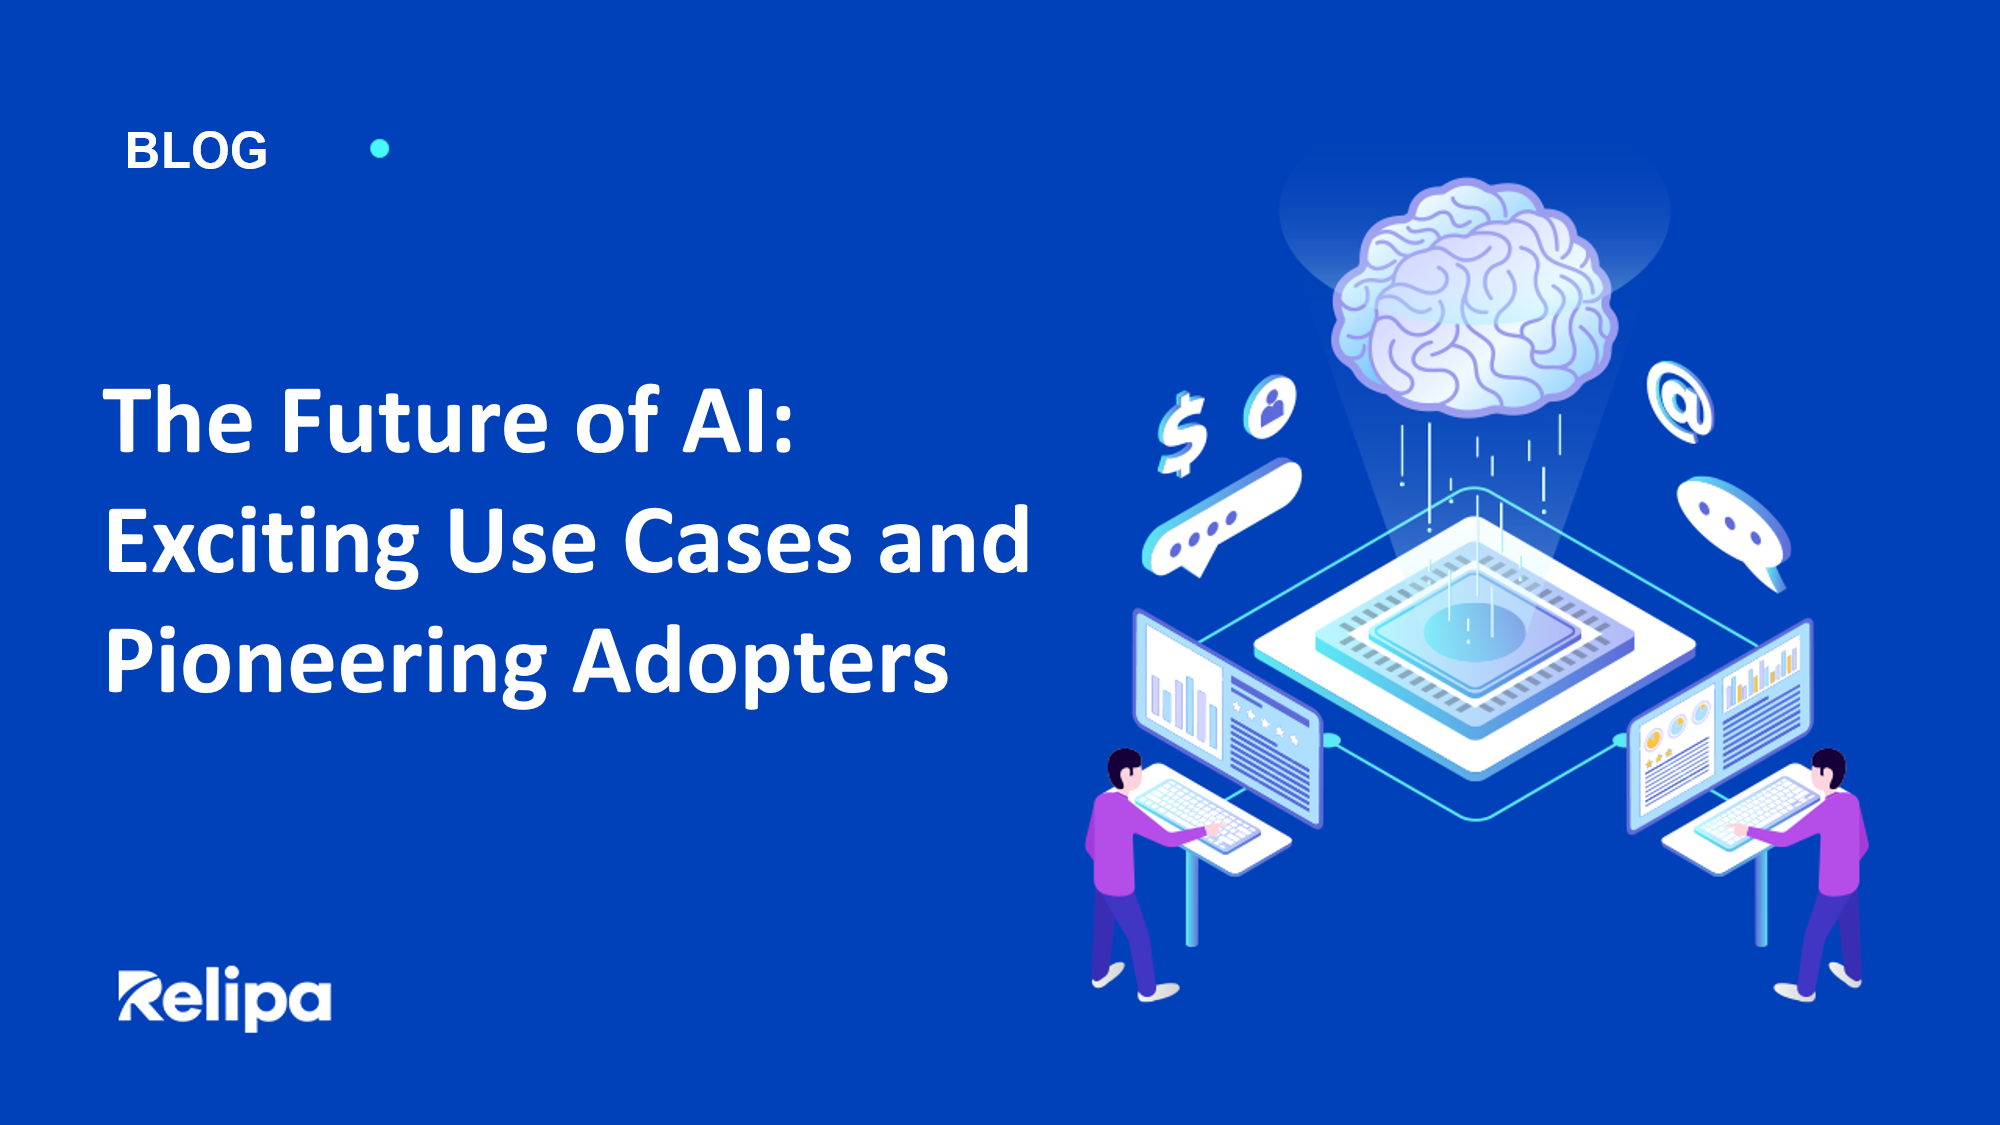 The Future of AI: Exciting Use Cases and Pioneering Adopters